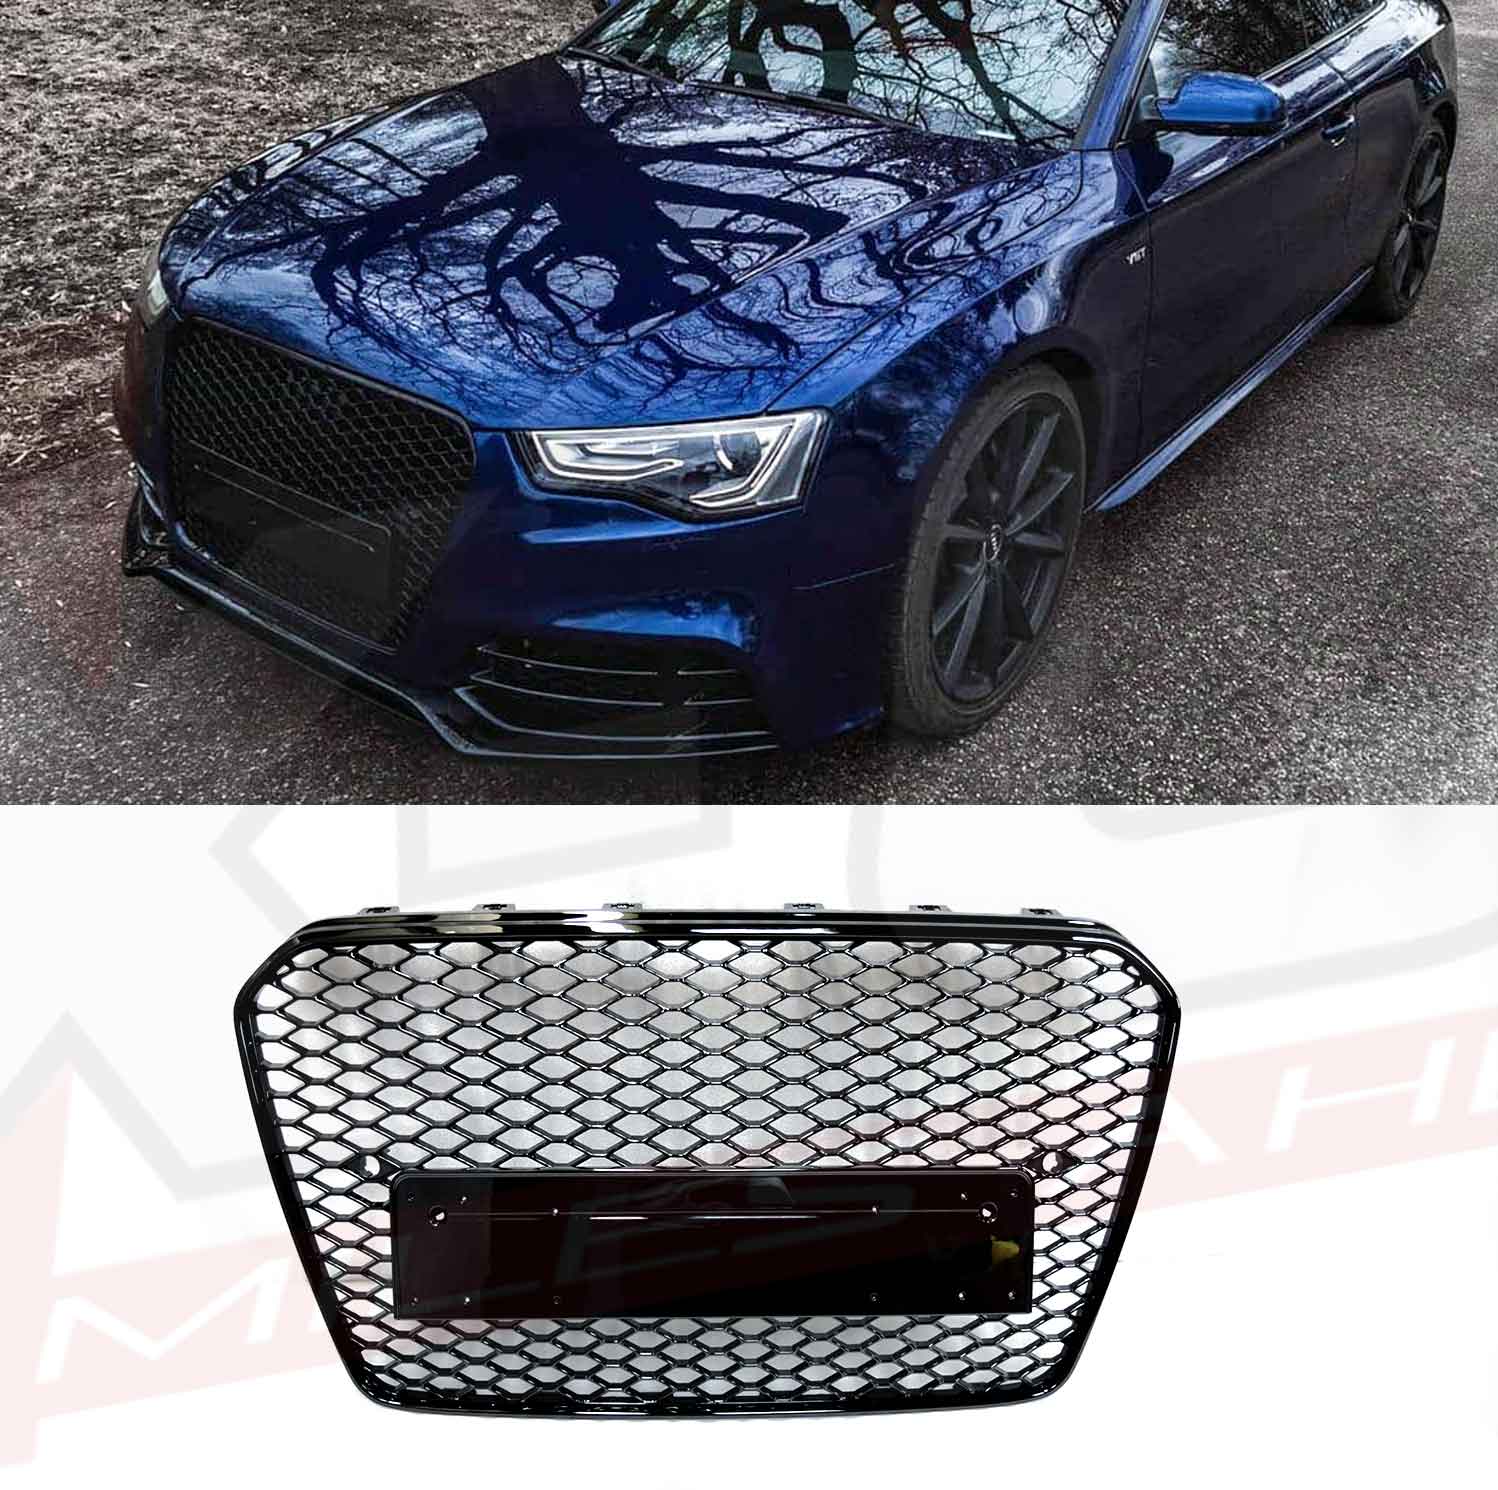 Gorgeri Hex Mesh Honeycomb Grill,Front Sport Hex Mesh Honeycomb Hood Grill for A5/S5 B8.5 2013-2016 RS5 Quattro Style 